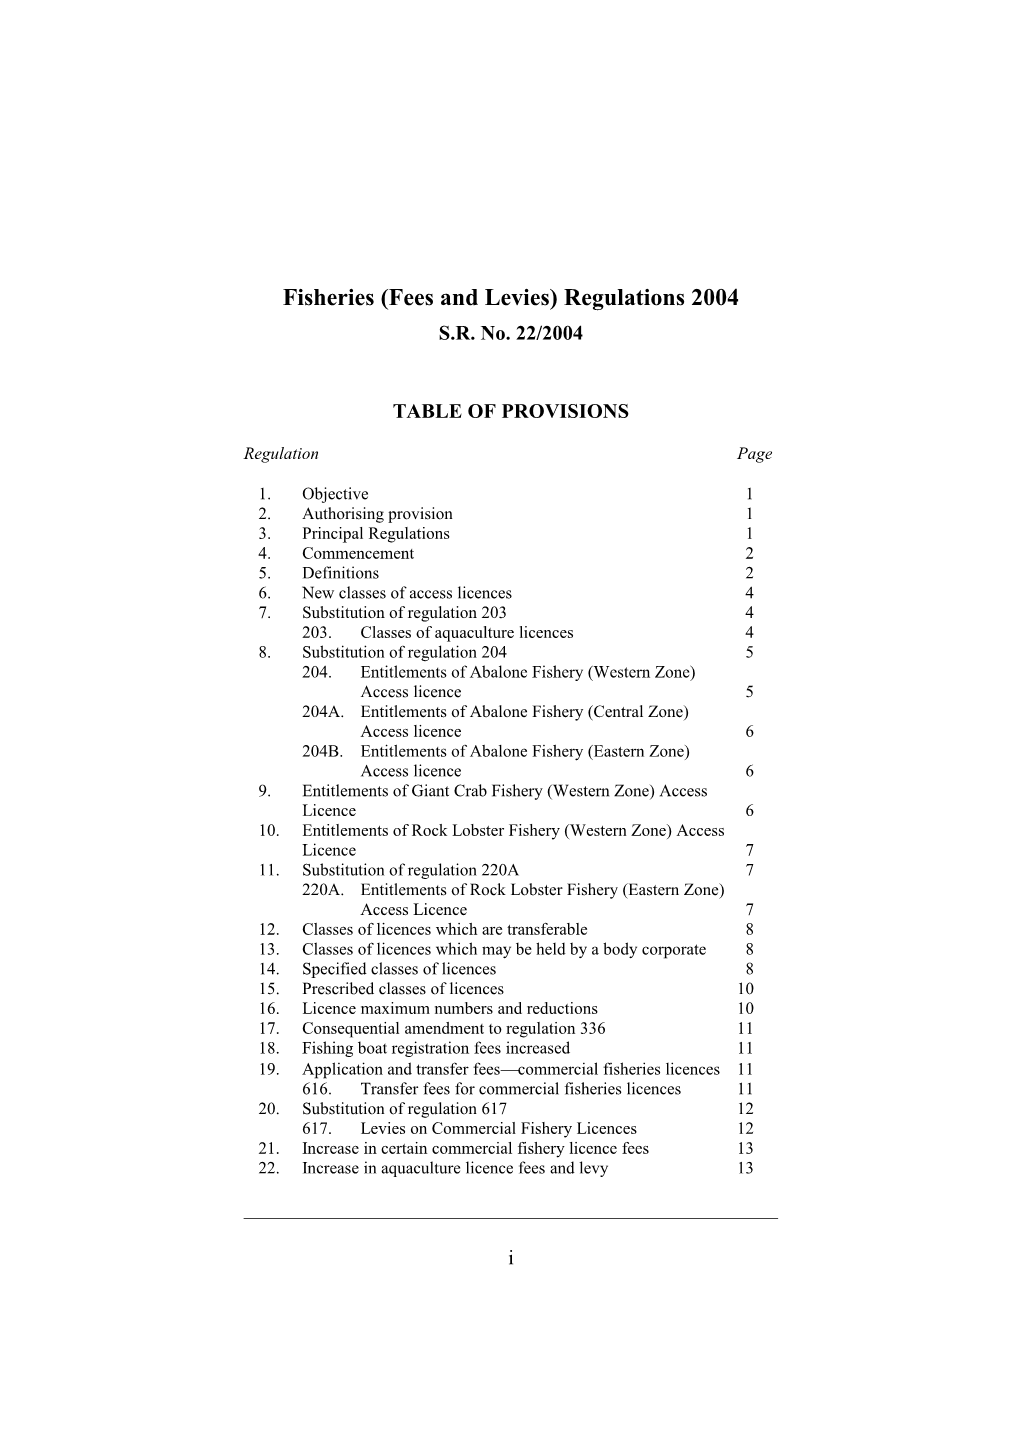 Fisheries (Fees and Levies) Regulations 2004